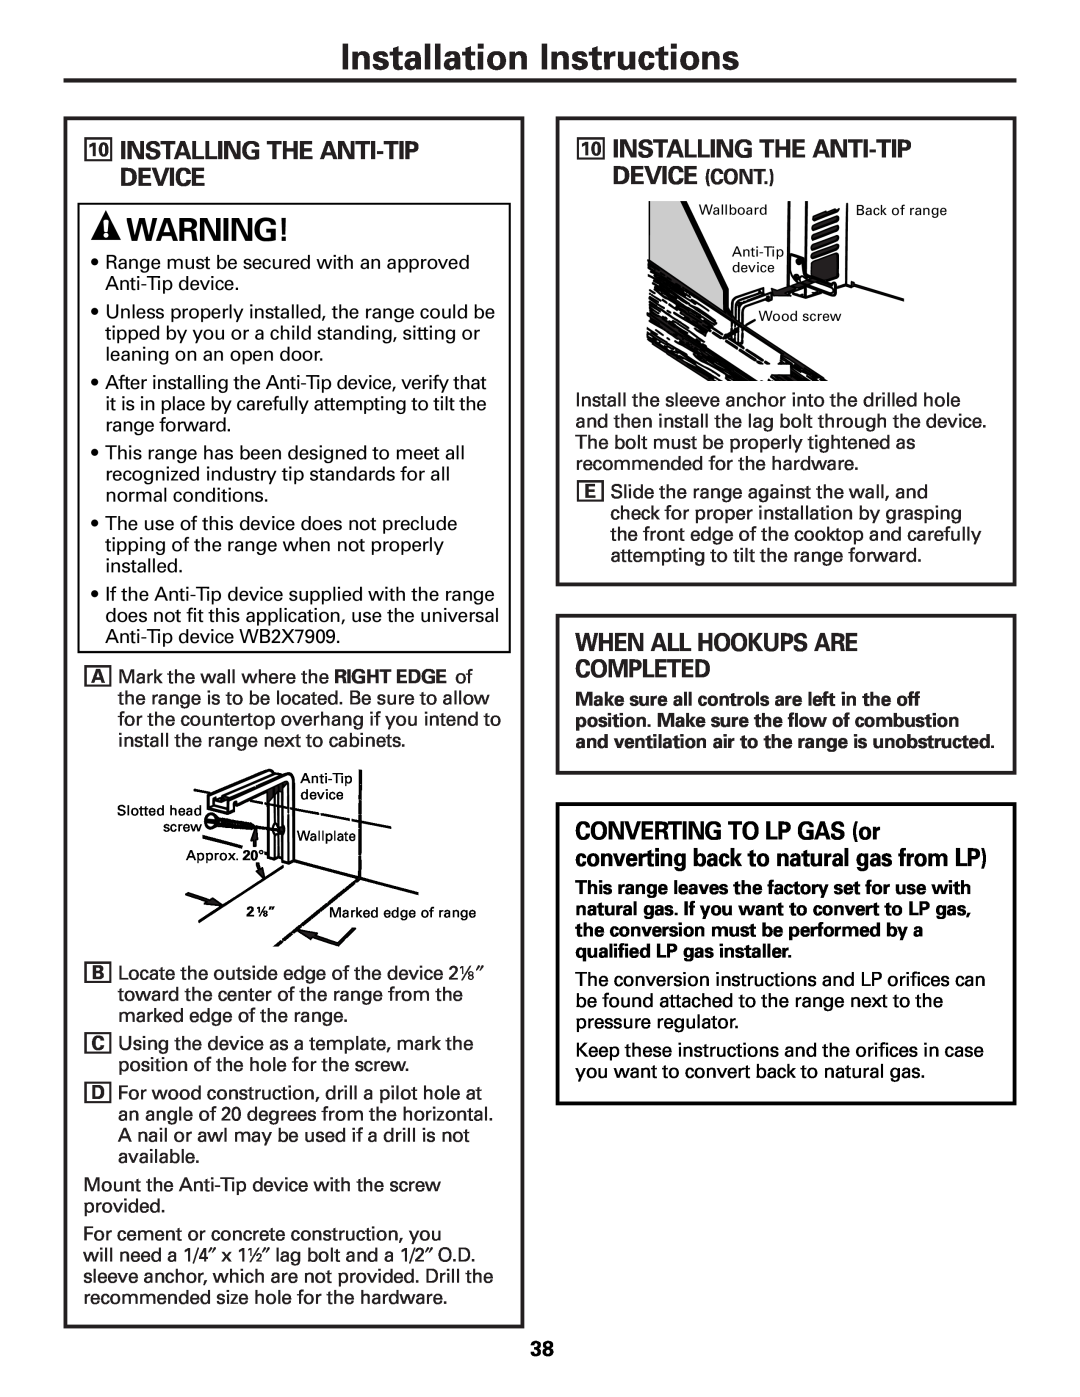 GE JGBS80 Installation Instructions, 10INSTALLING THE ANTI-TIPDEVICE CONT, When All Hookups Are Completed 